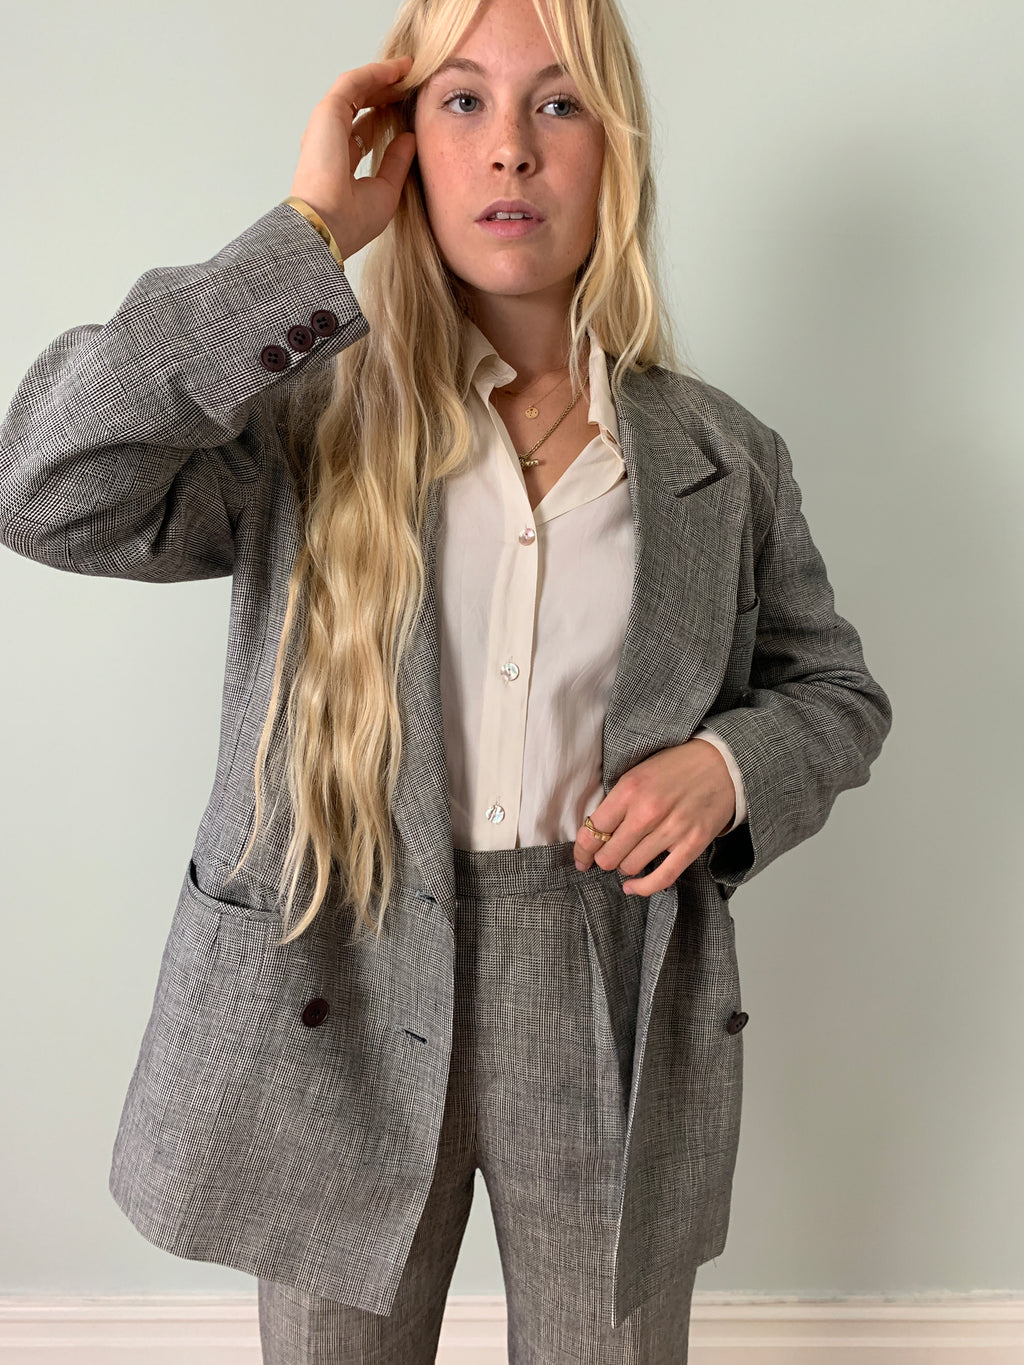 Vintage HOBBS by Mary Anselm suit